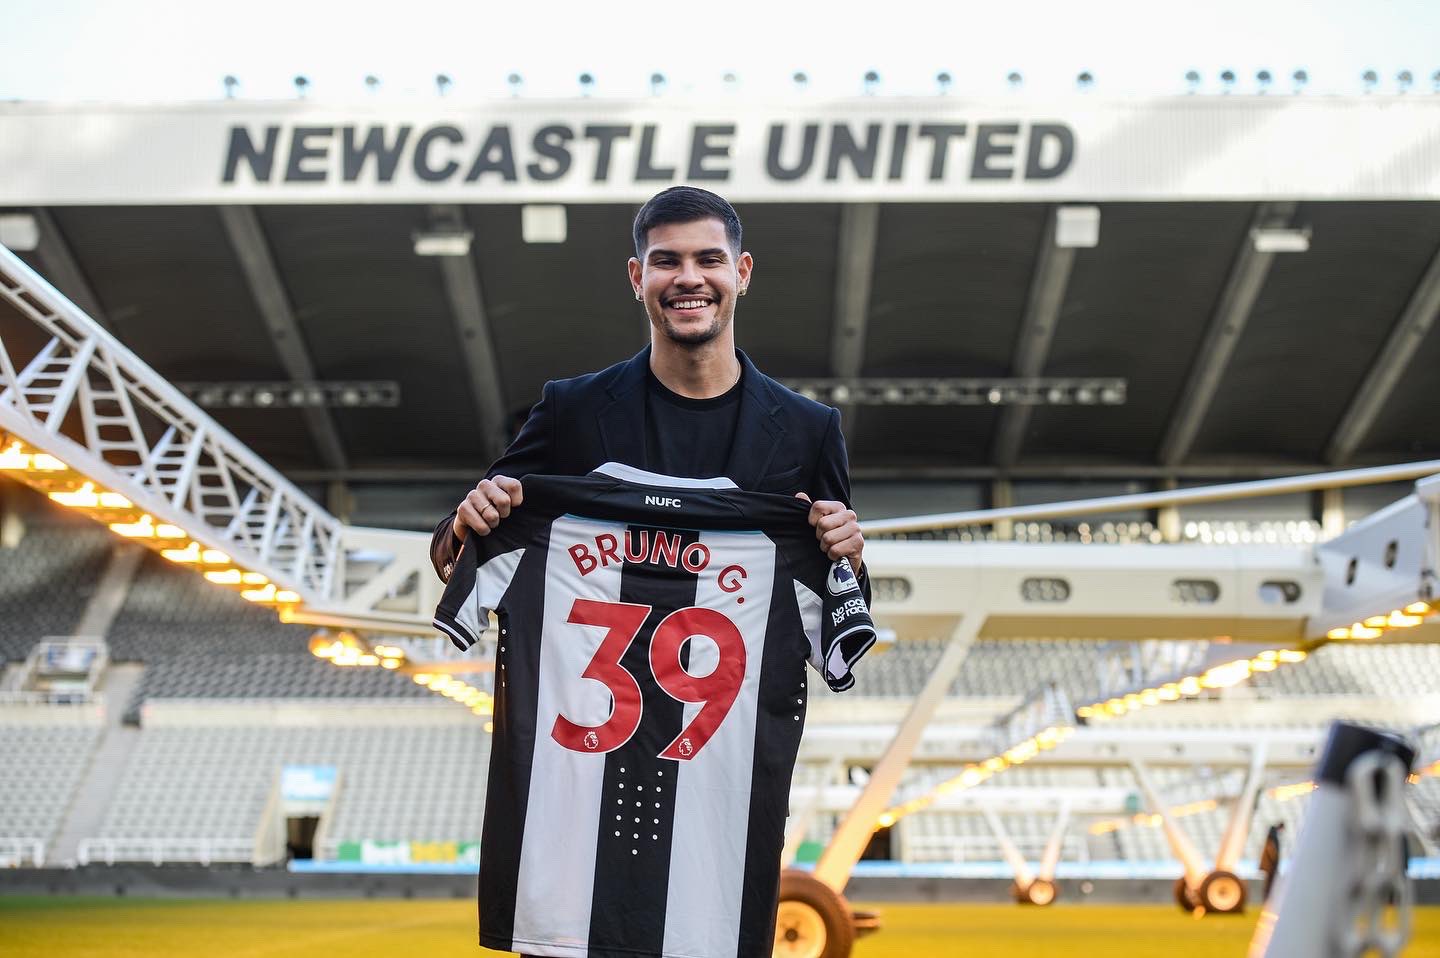 Newcastle United are going to be big power in world football, claims Bruno Guimarães